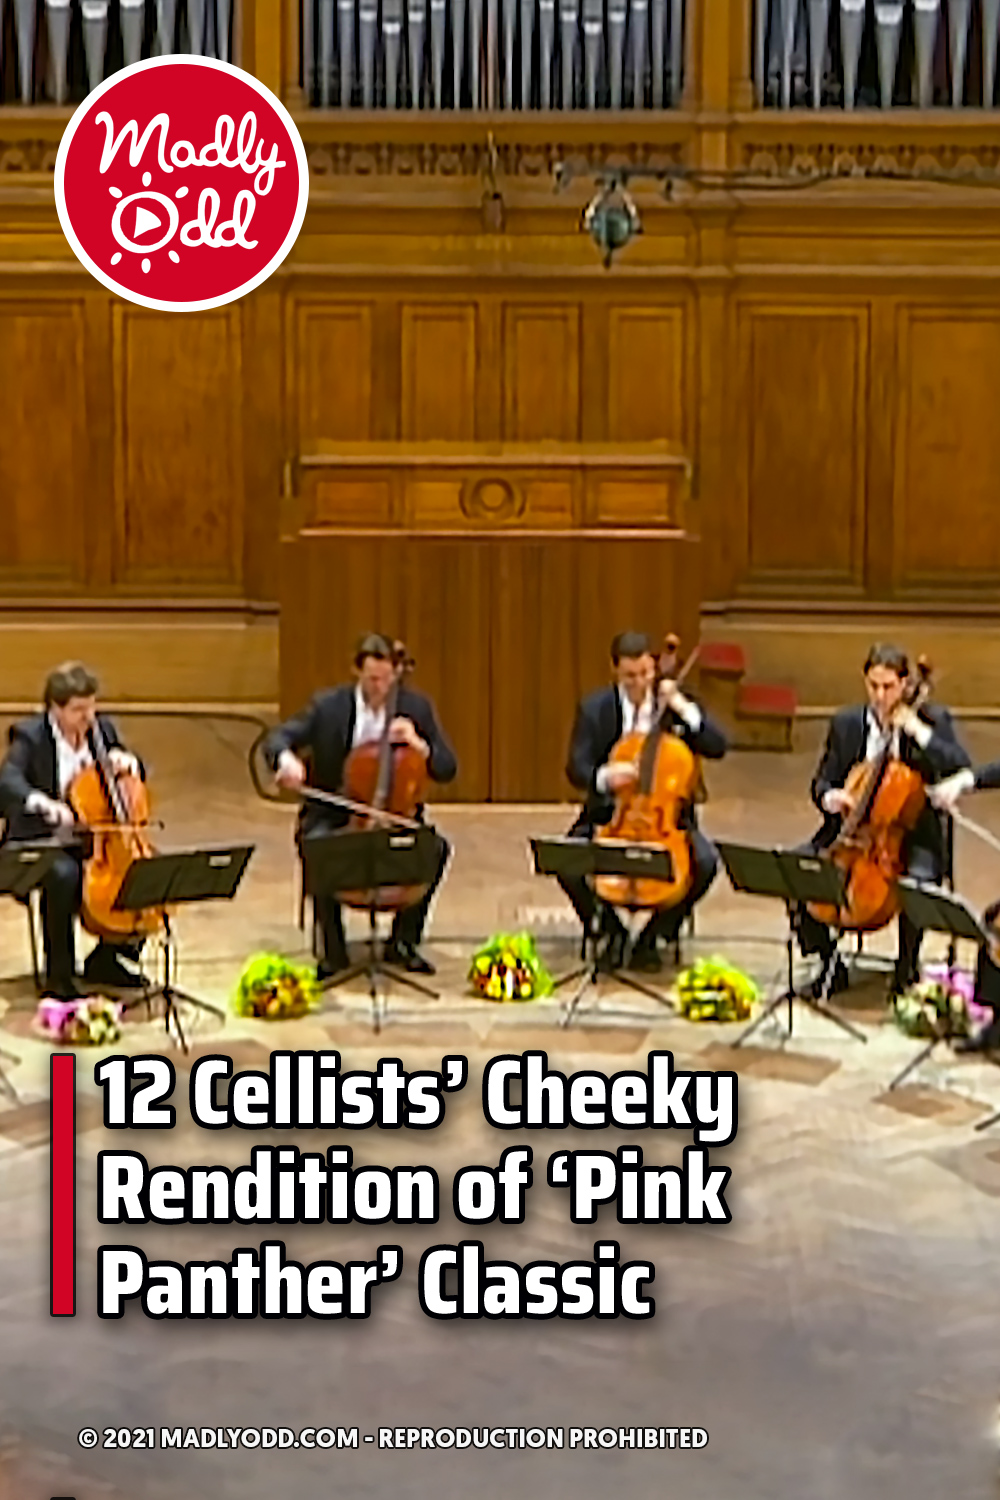 12 Cellists’ Cheeky Rendition of ‘Pink Panther’ Classic